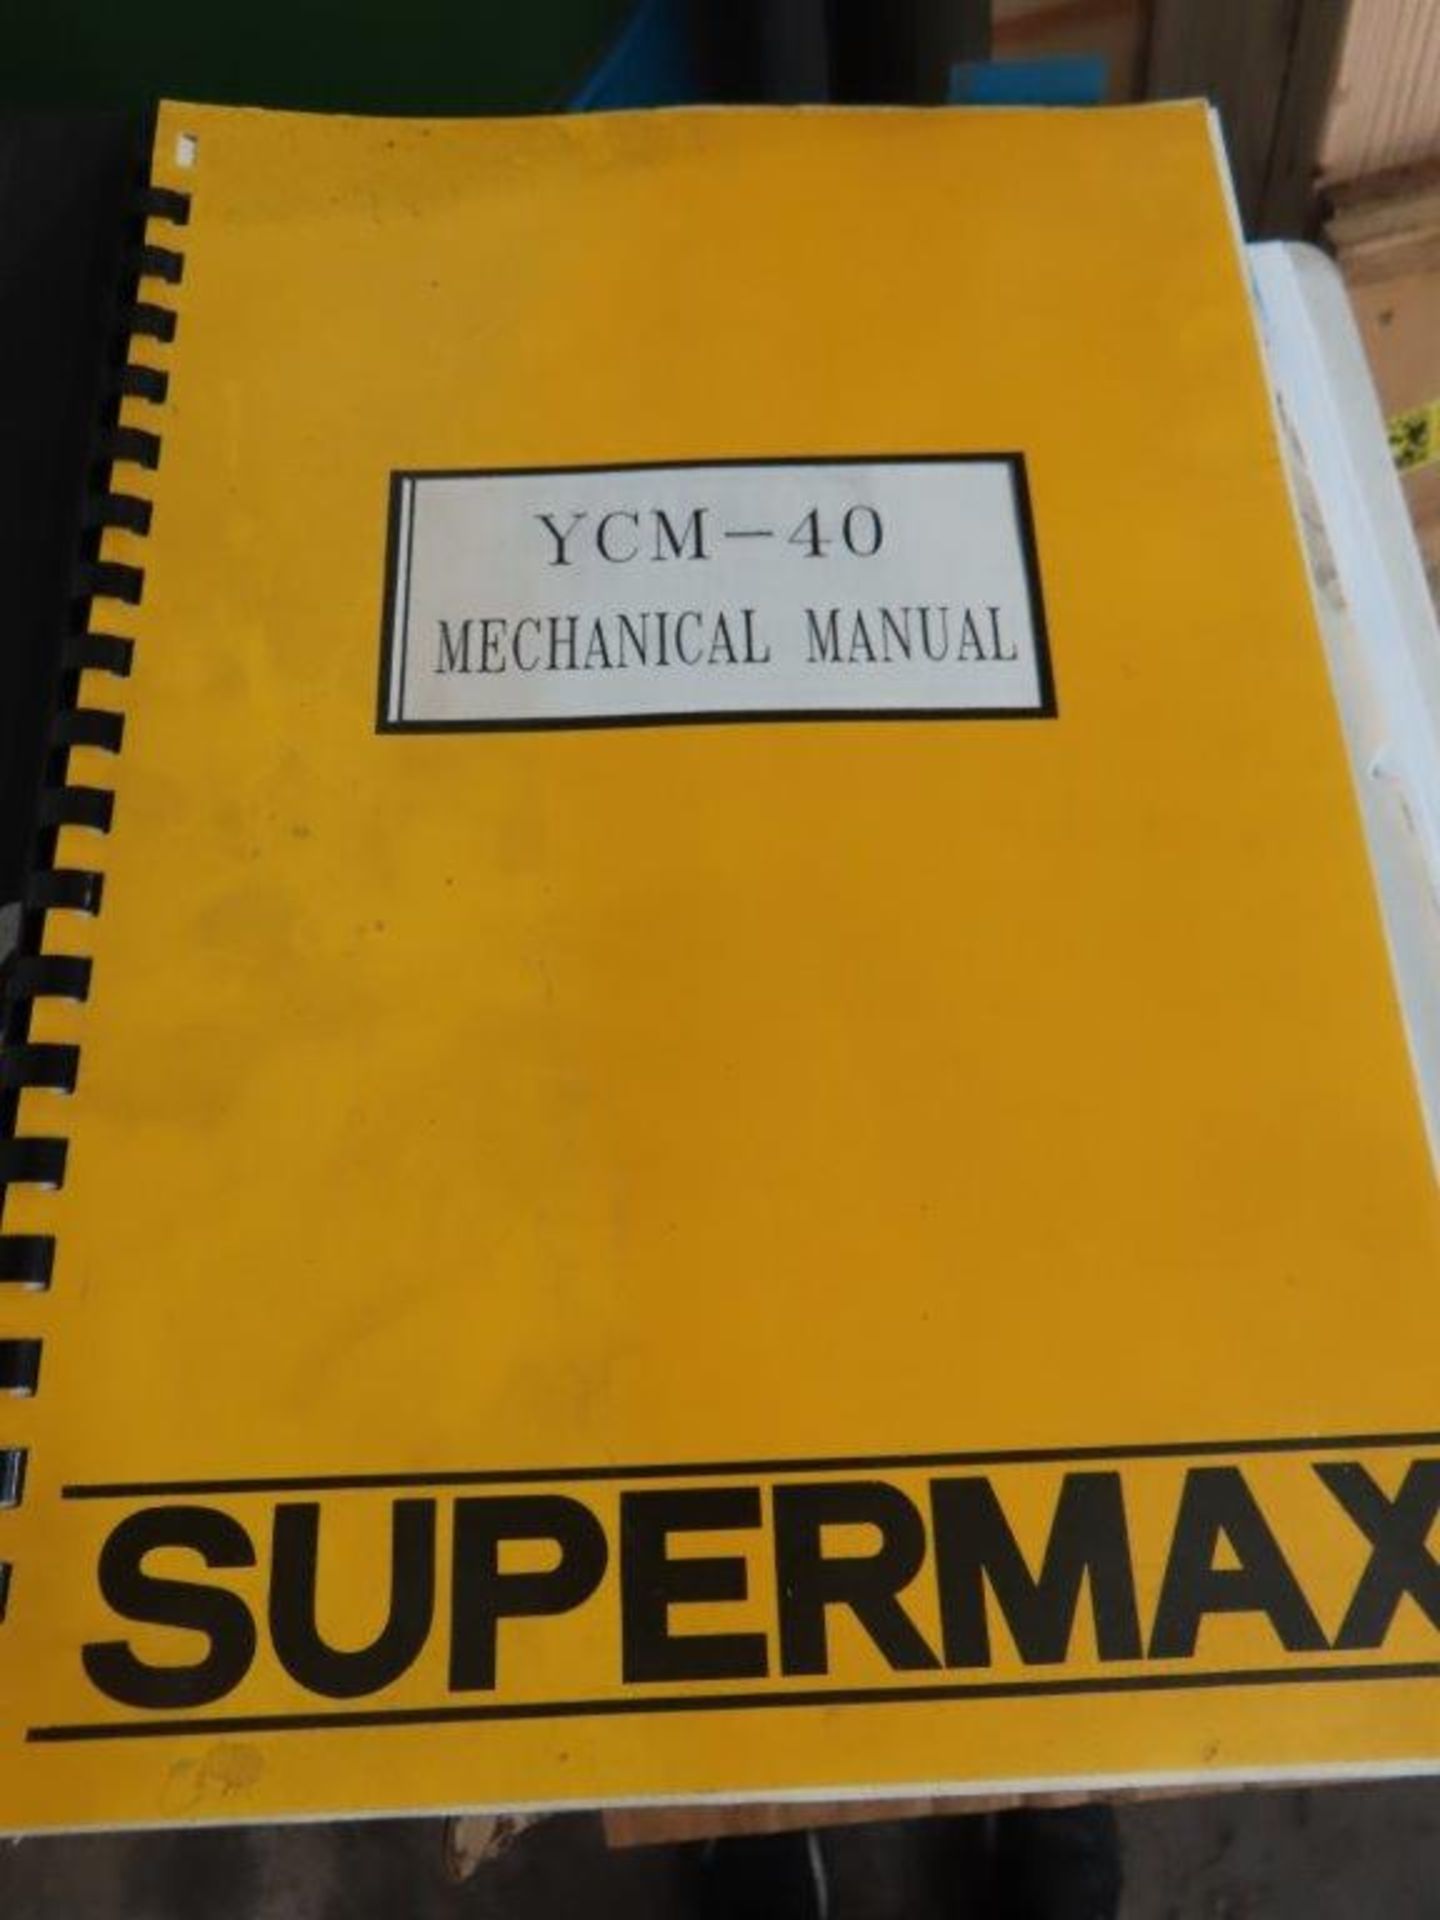 1995 Supermax YCM-40 With Centroid 3 Axis CNC - Image 16 of 17